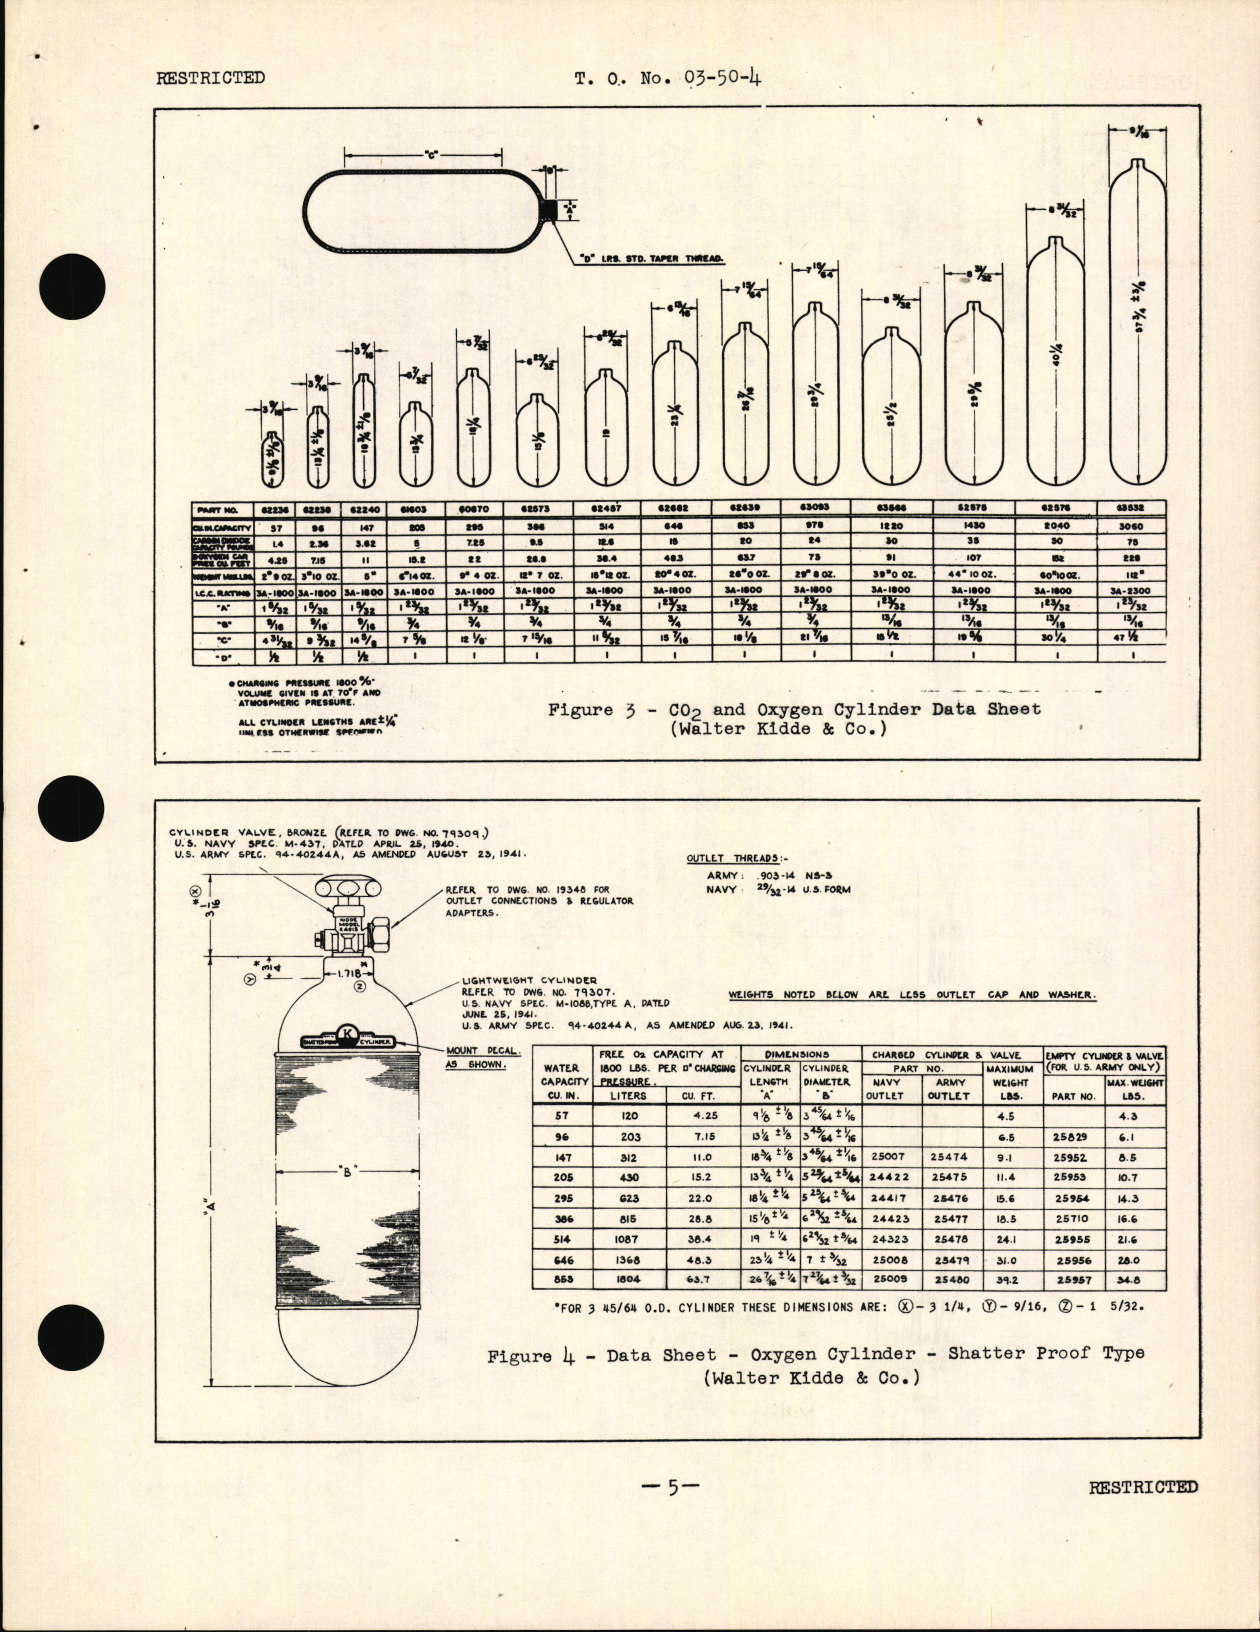 Sample page 7 from AirCorps Library document: Handbook of Instructions with Parts Catalog for Oxygen Cylinders